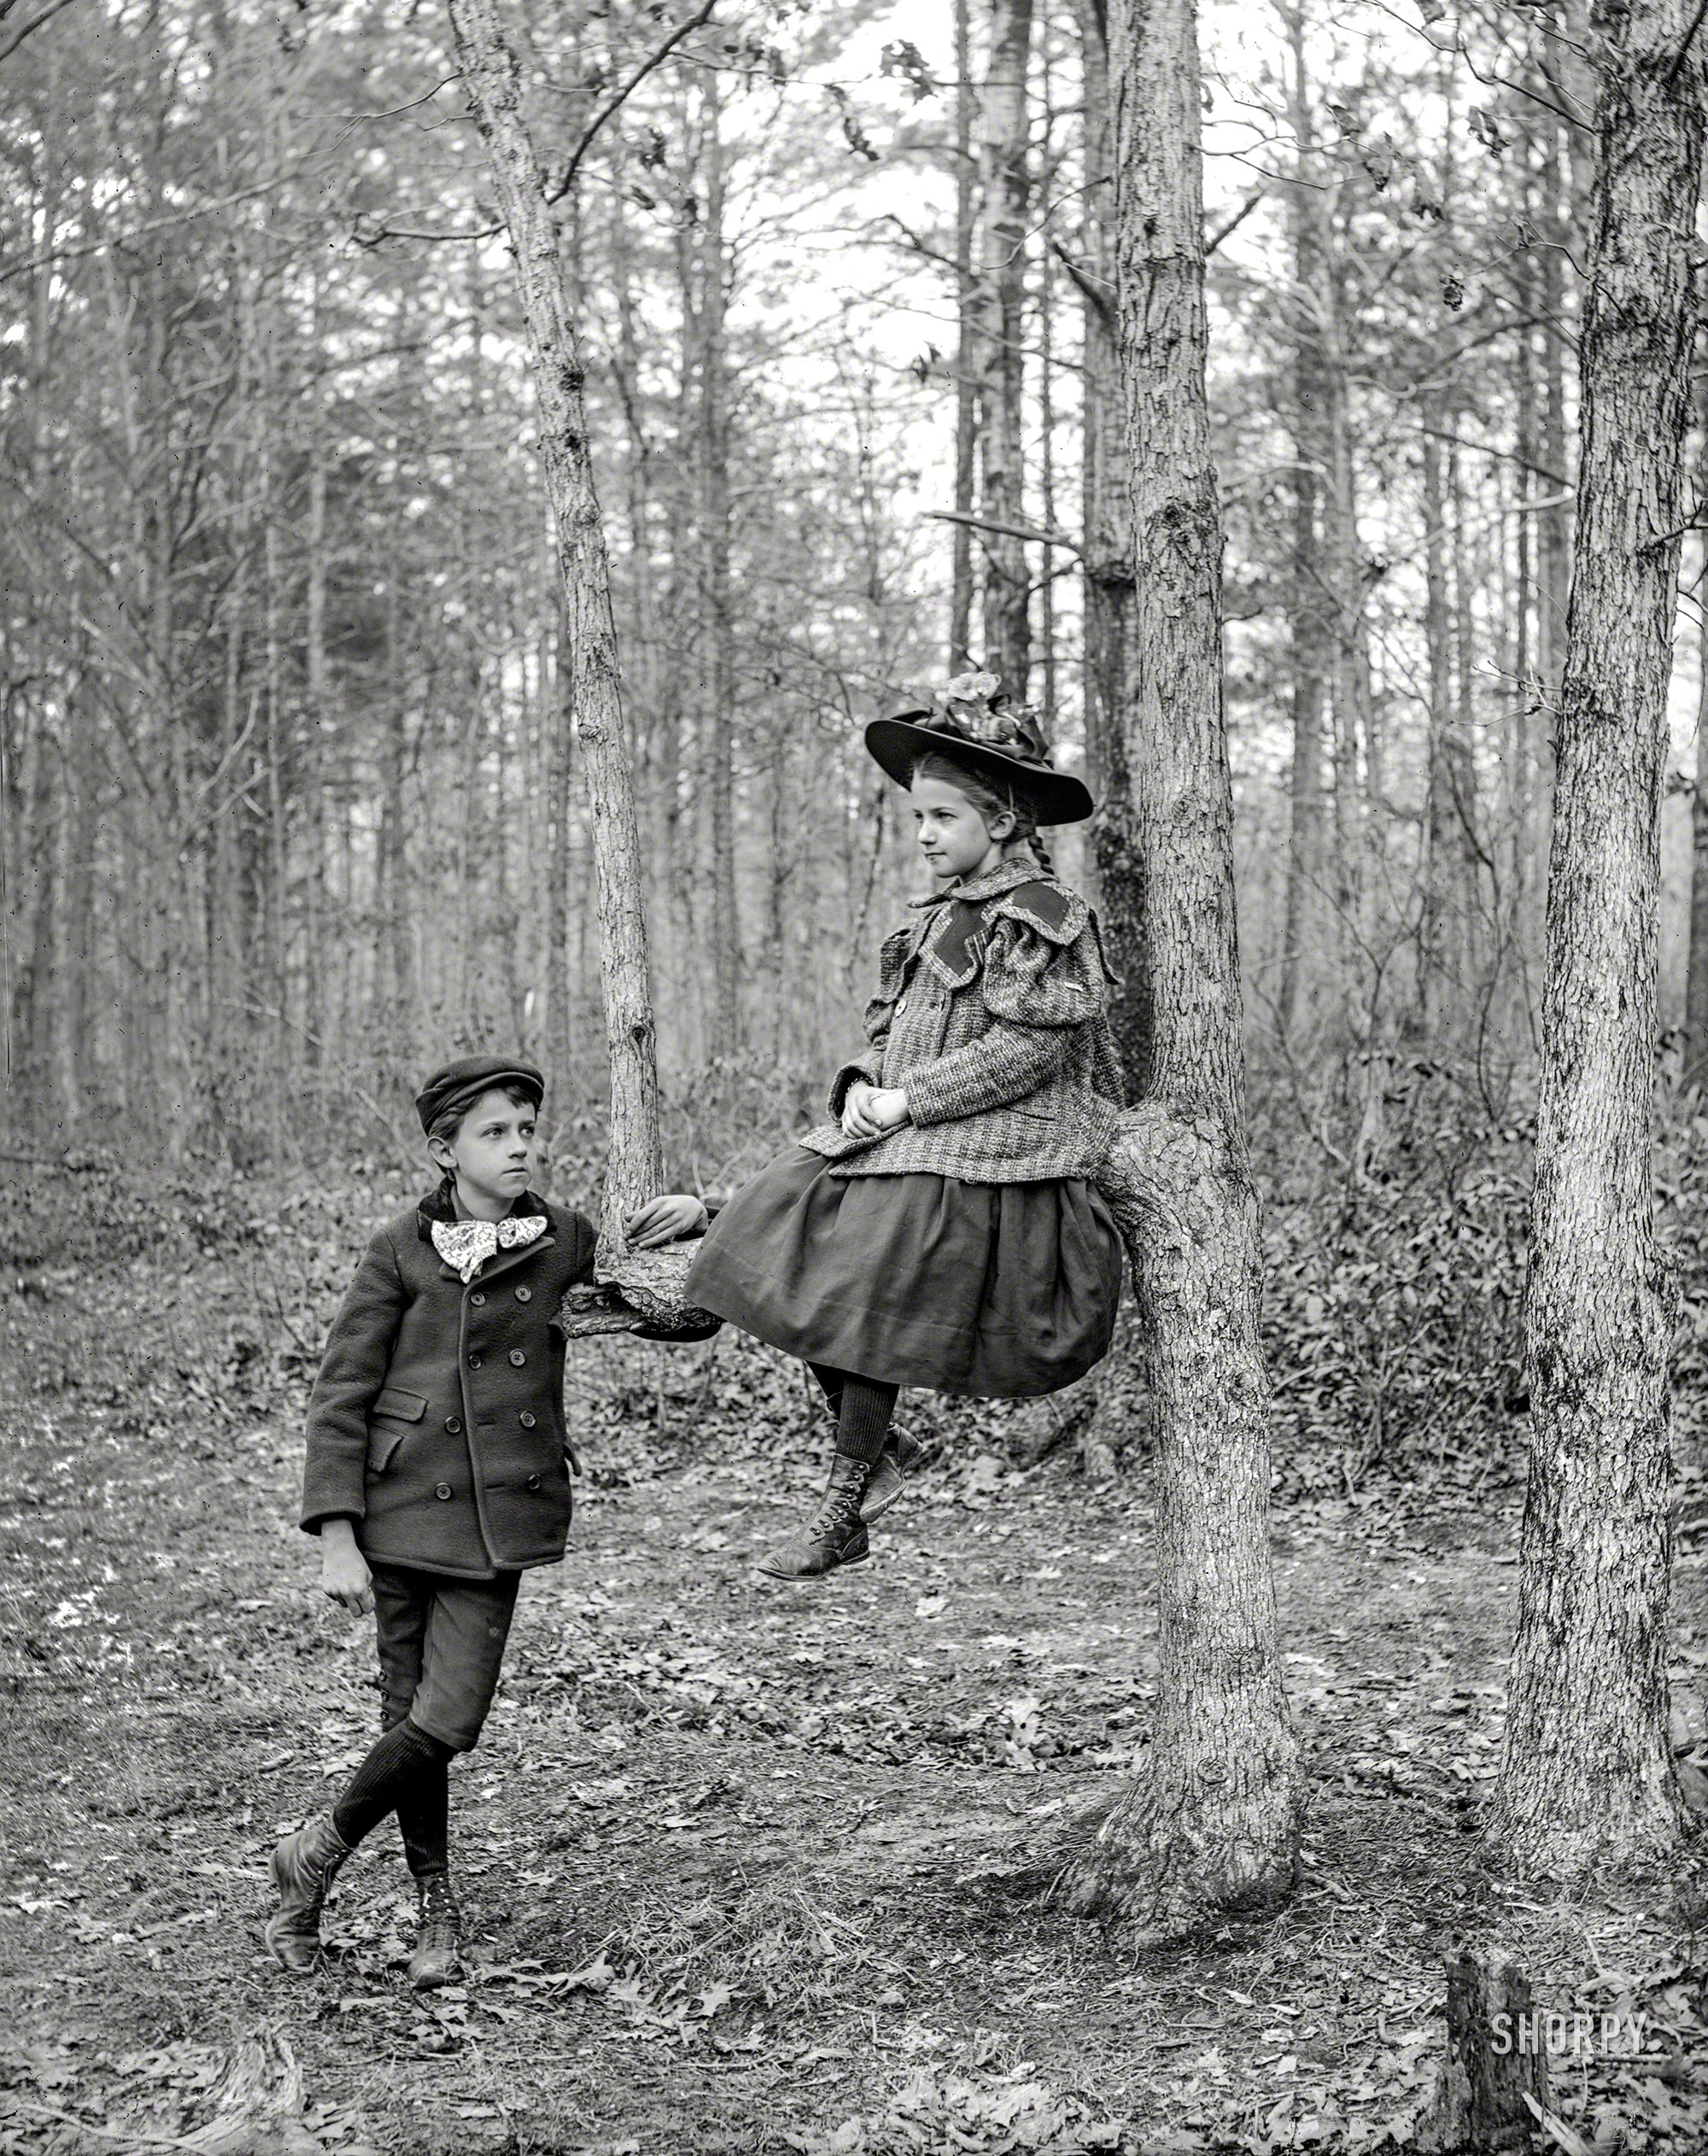 Takoma Park, Md., circa 1895. Another look at Willard and Helen Douglas and their 90-degree tree. 5x7 glass negative by Edward M. Douglas. View full size.